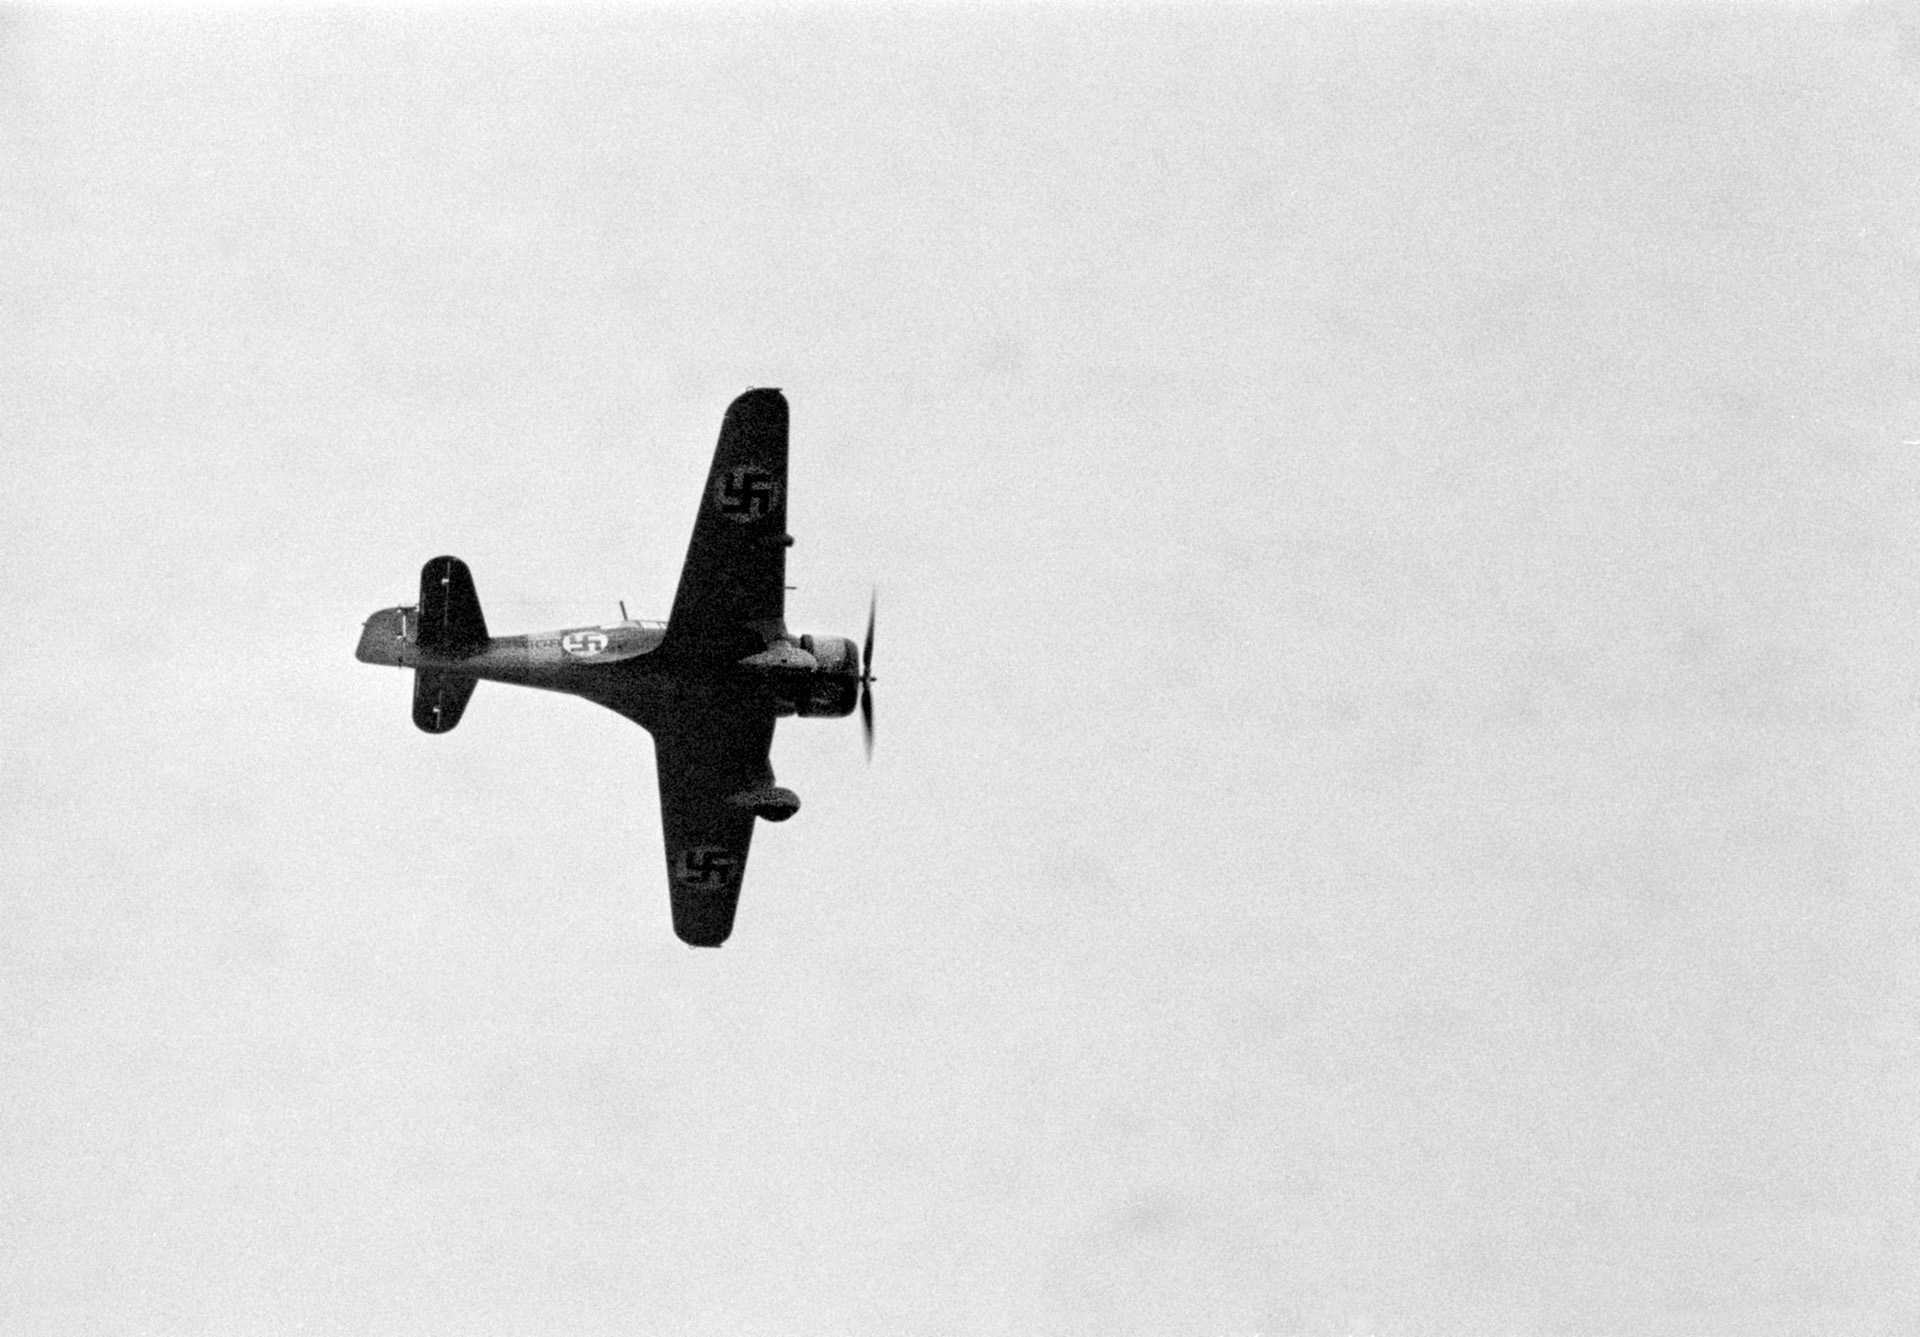 A Fokker D.XXI of the Finnish Air Force with a blue swastika painted on the fuselage flies overhead. The symbol had nothing to do with Nazi Germany, and dates to 1918.